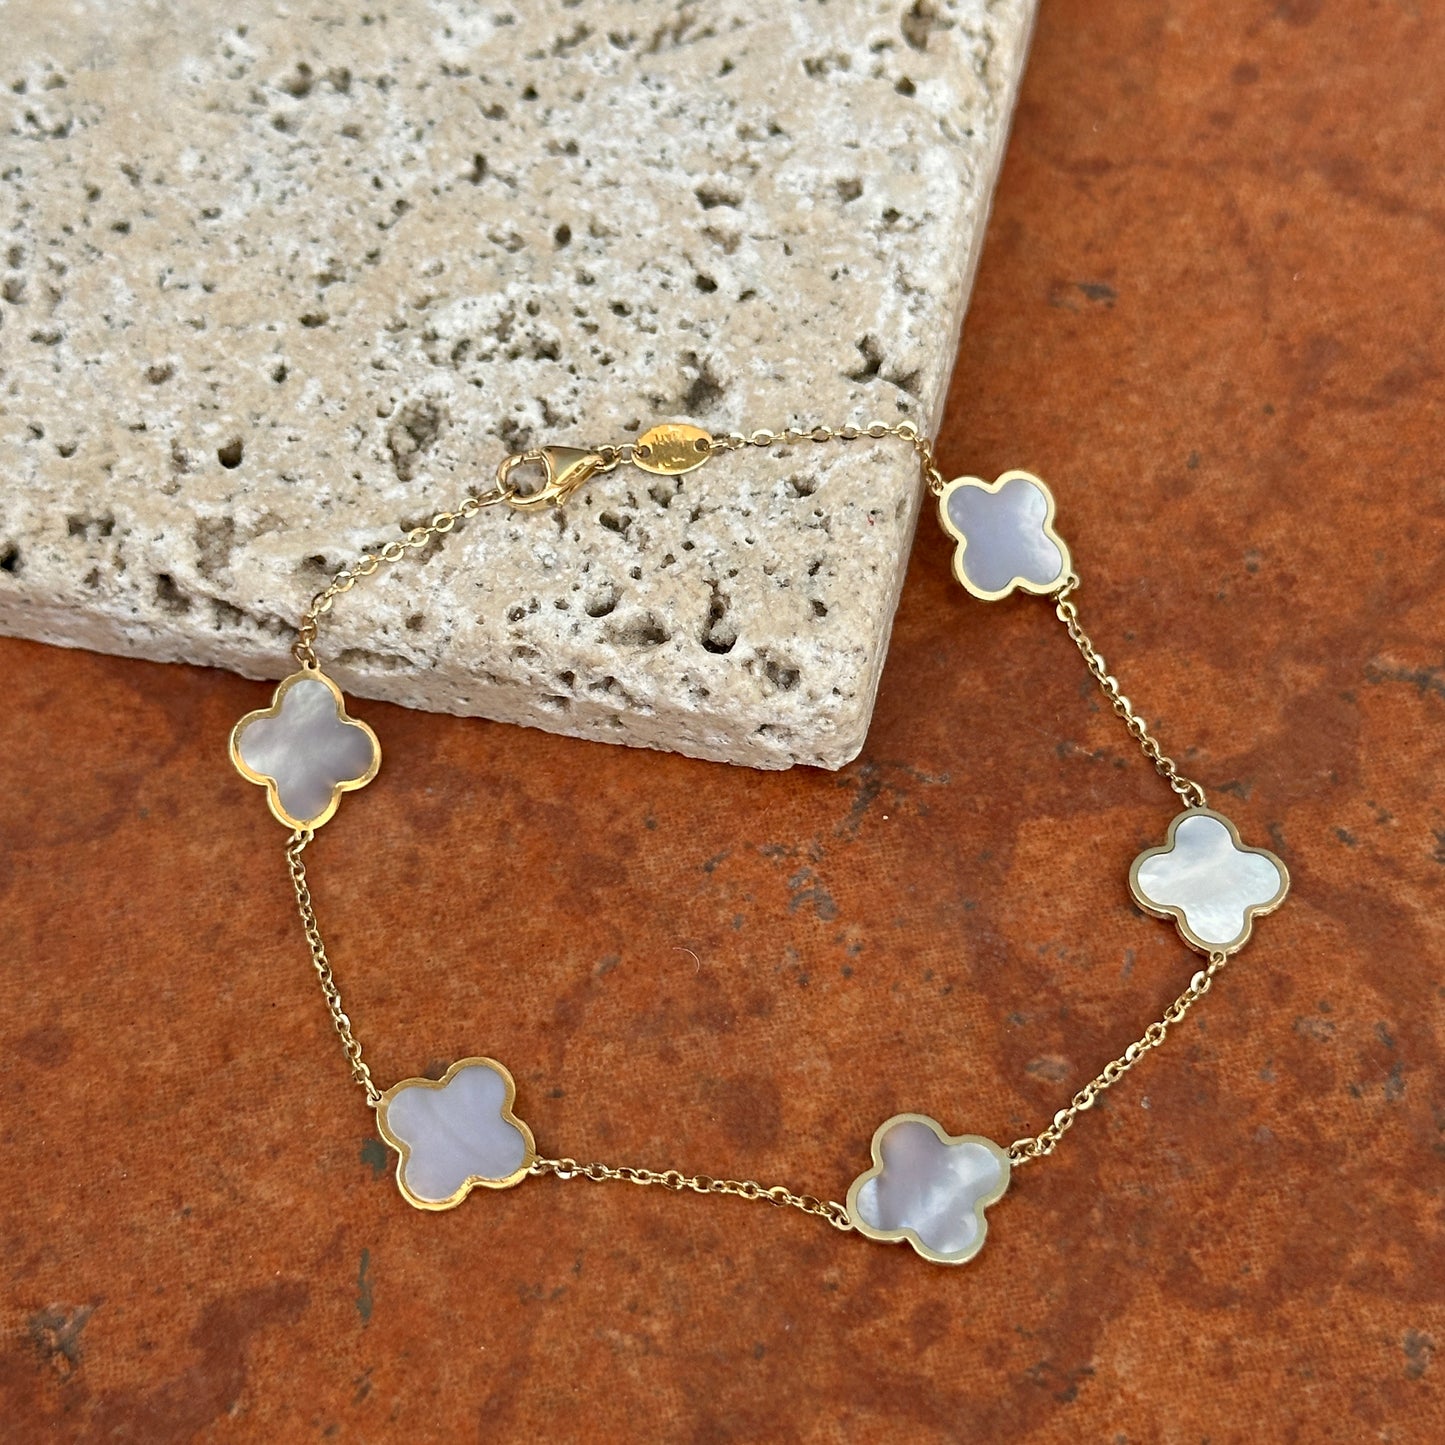 14KT Yellow Gold Mother of Pearl 4 Leaf Cover Charm Chain Bracelet